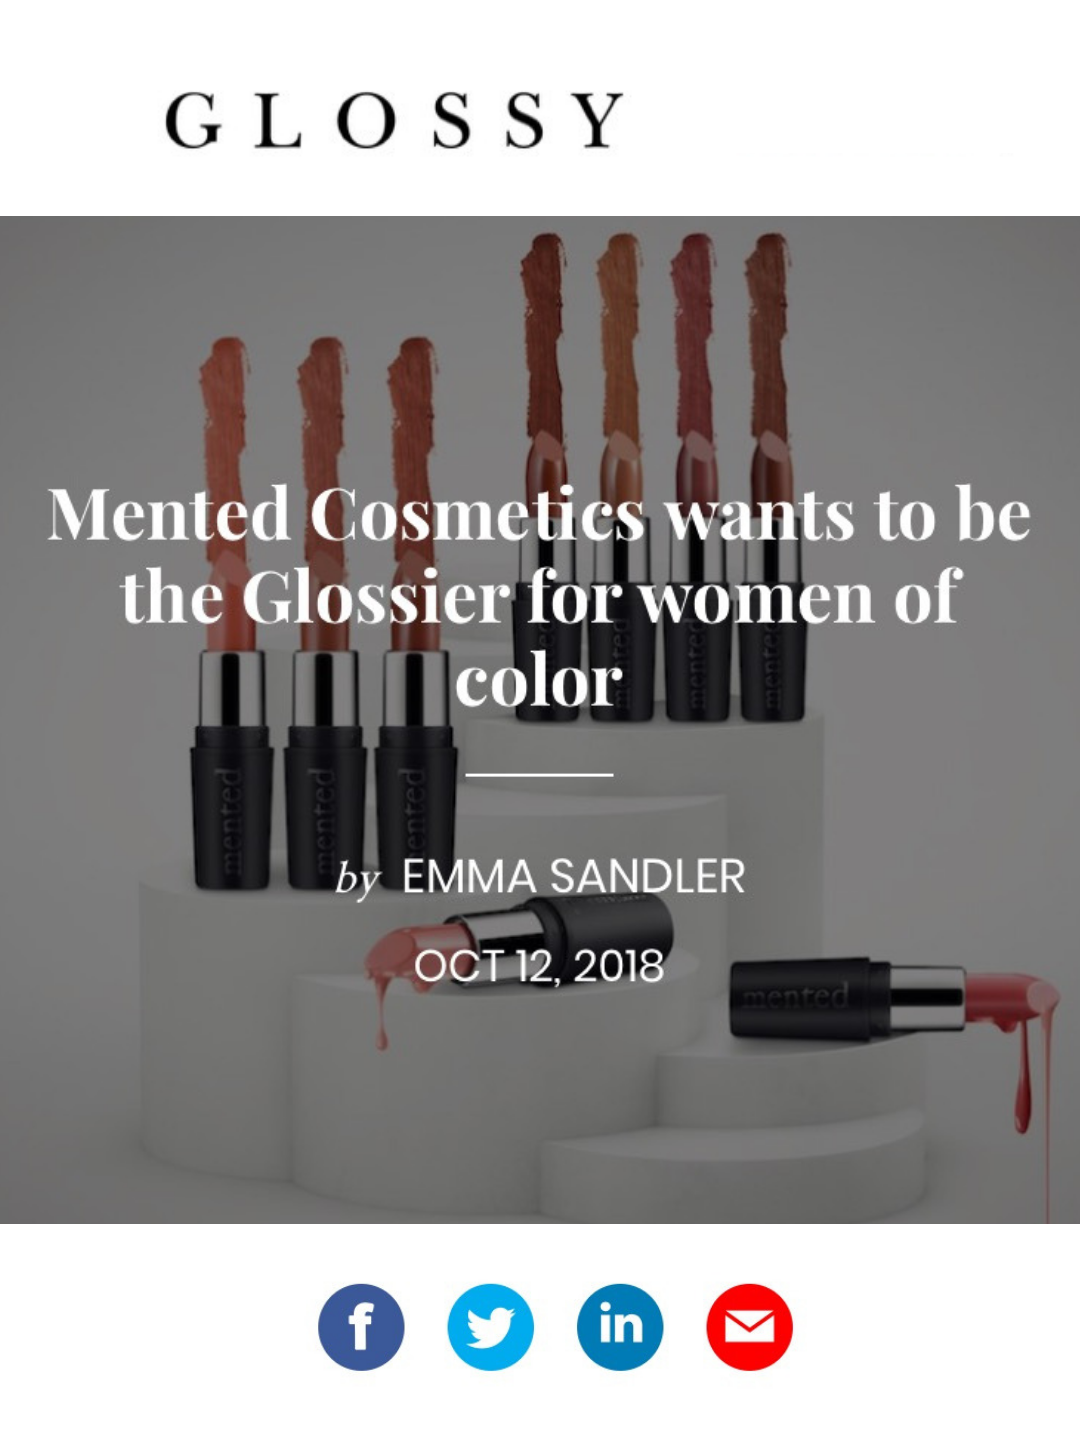 Mented Cosmetics wants to be the Glossier for women of color